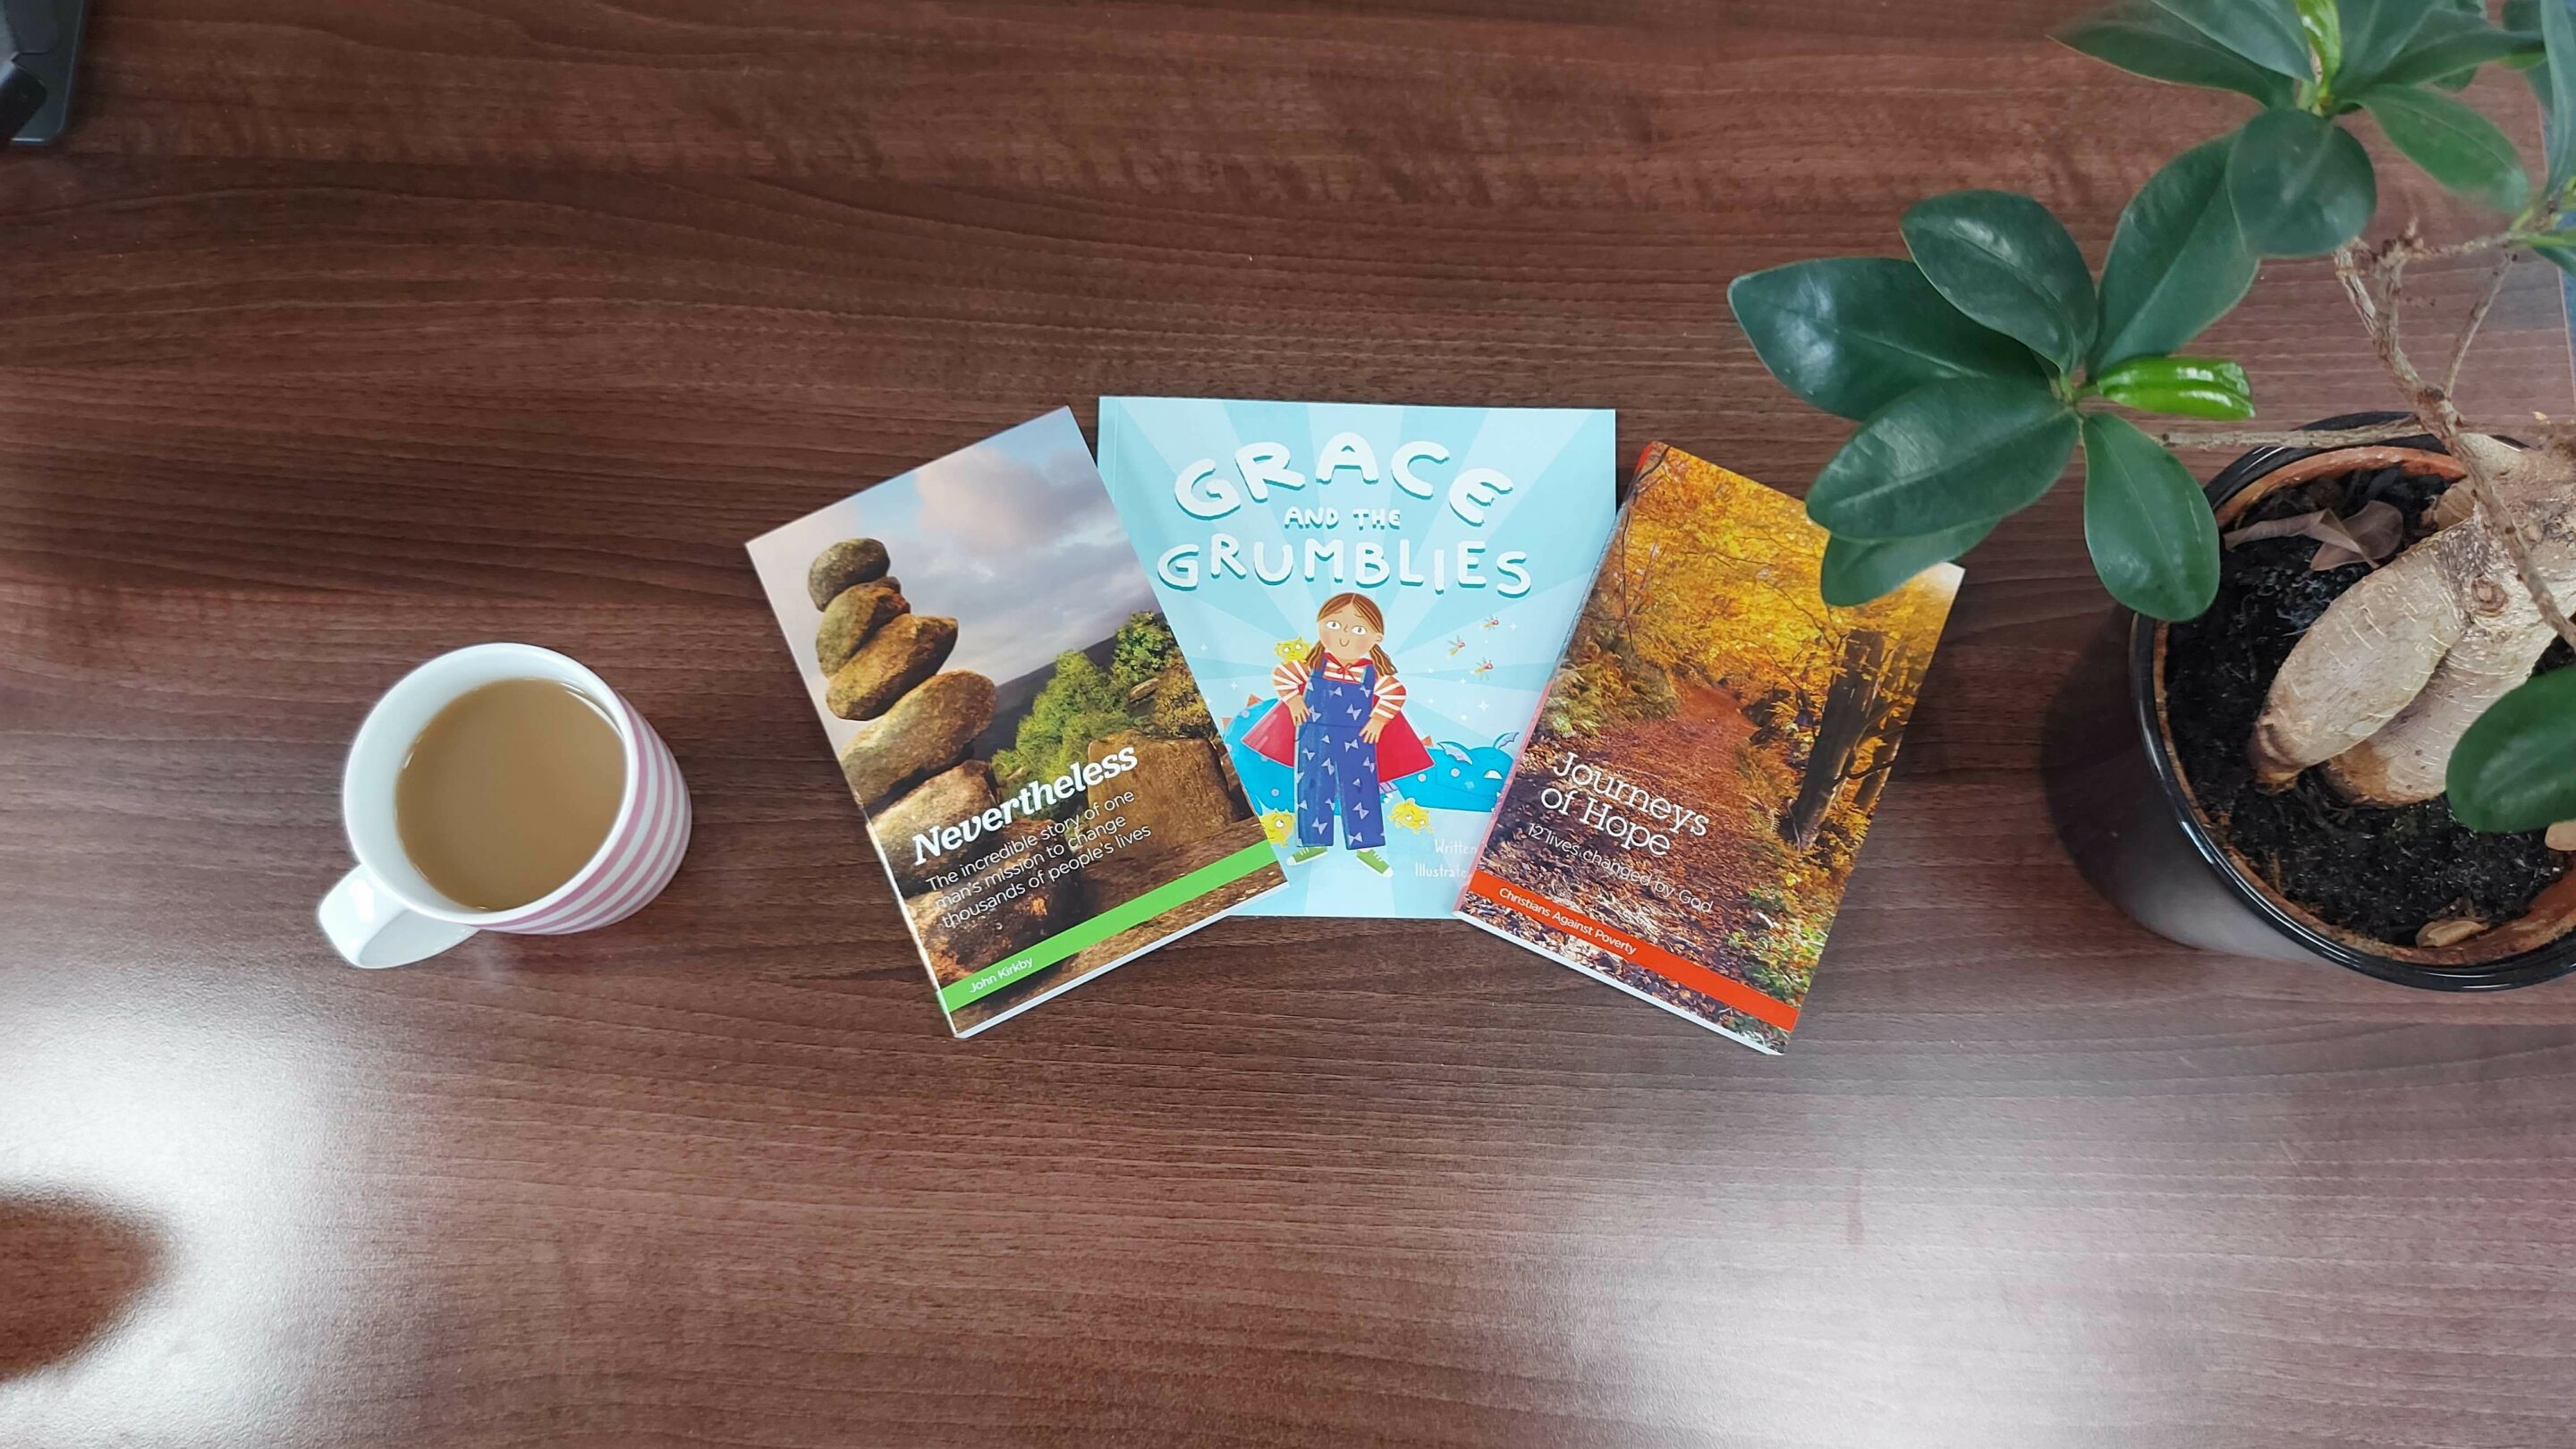 Three books laid out on the table, Nevertheless, Grace and the grumblies and journeys of hope. There is a cup of tea on one side and a plant on the other side.